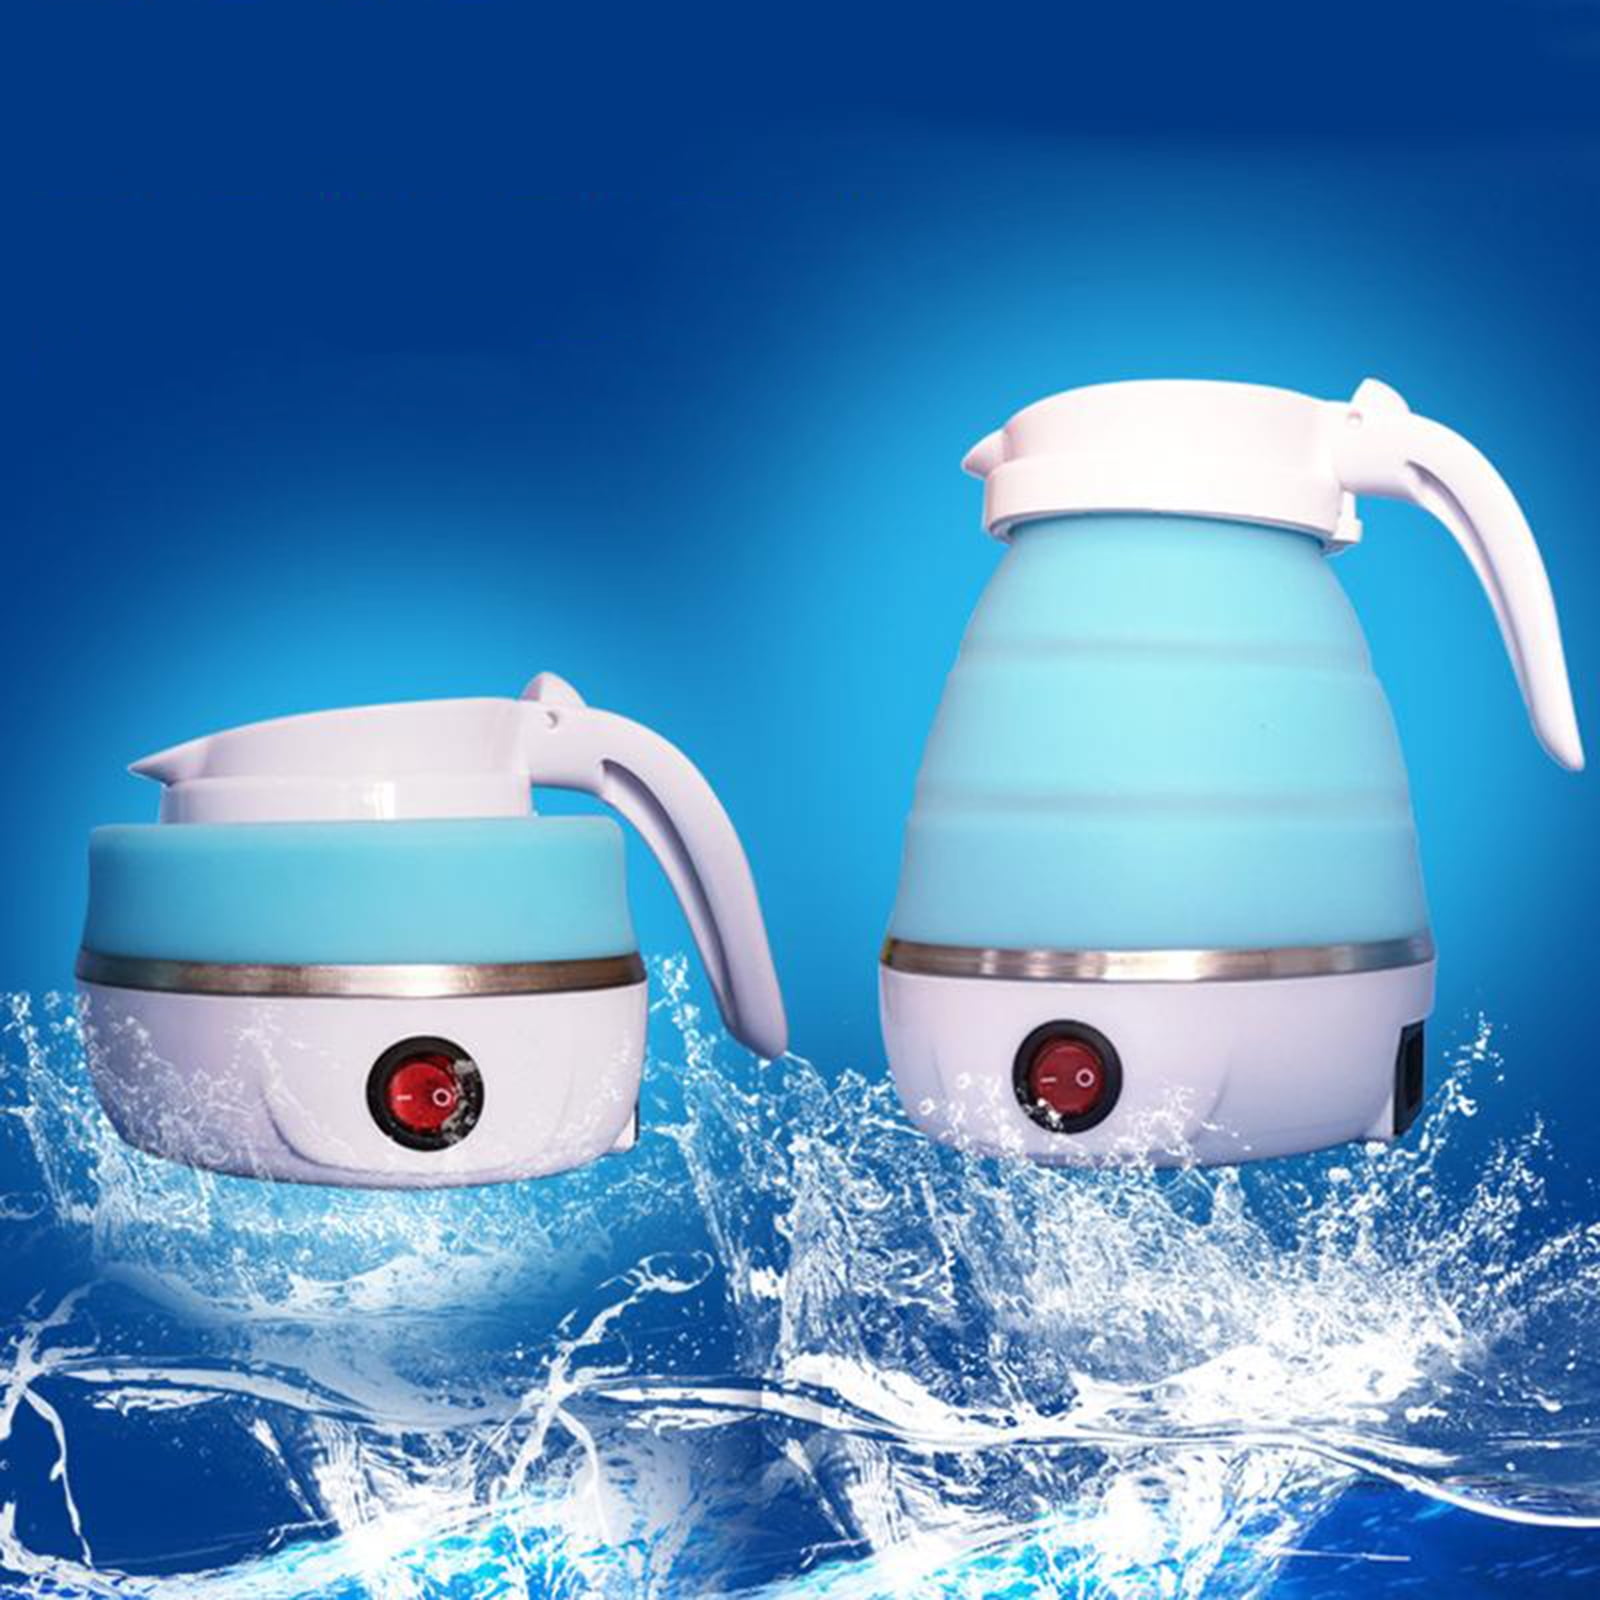  Portable Travel Electric Kettle 120V Hot Water Cup Plug 500Ml  Temperature Voltage for Small Kettle Water Boiler Kettle Boil with Water  Kettle Electric Kettles (Sealed): Home & Kitchen